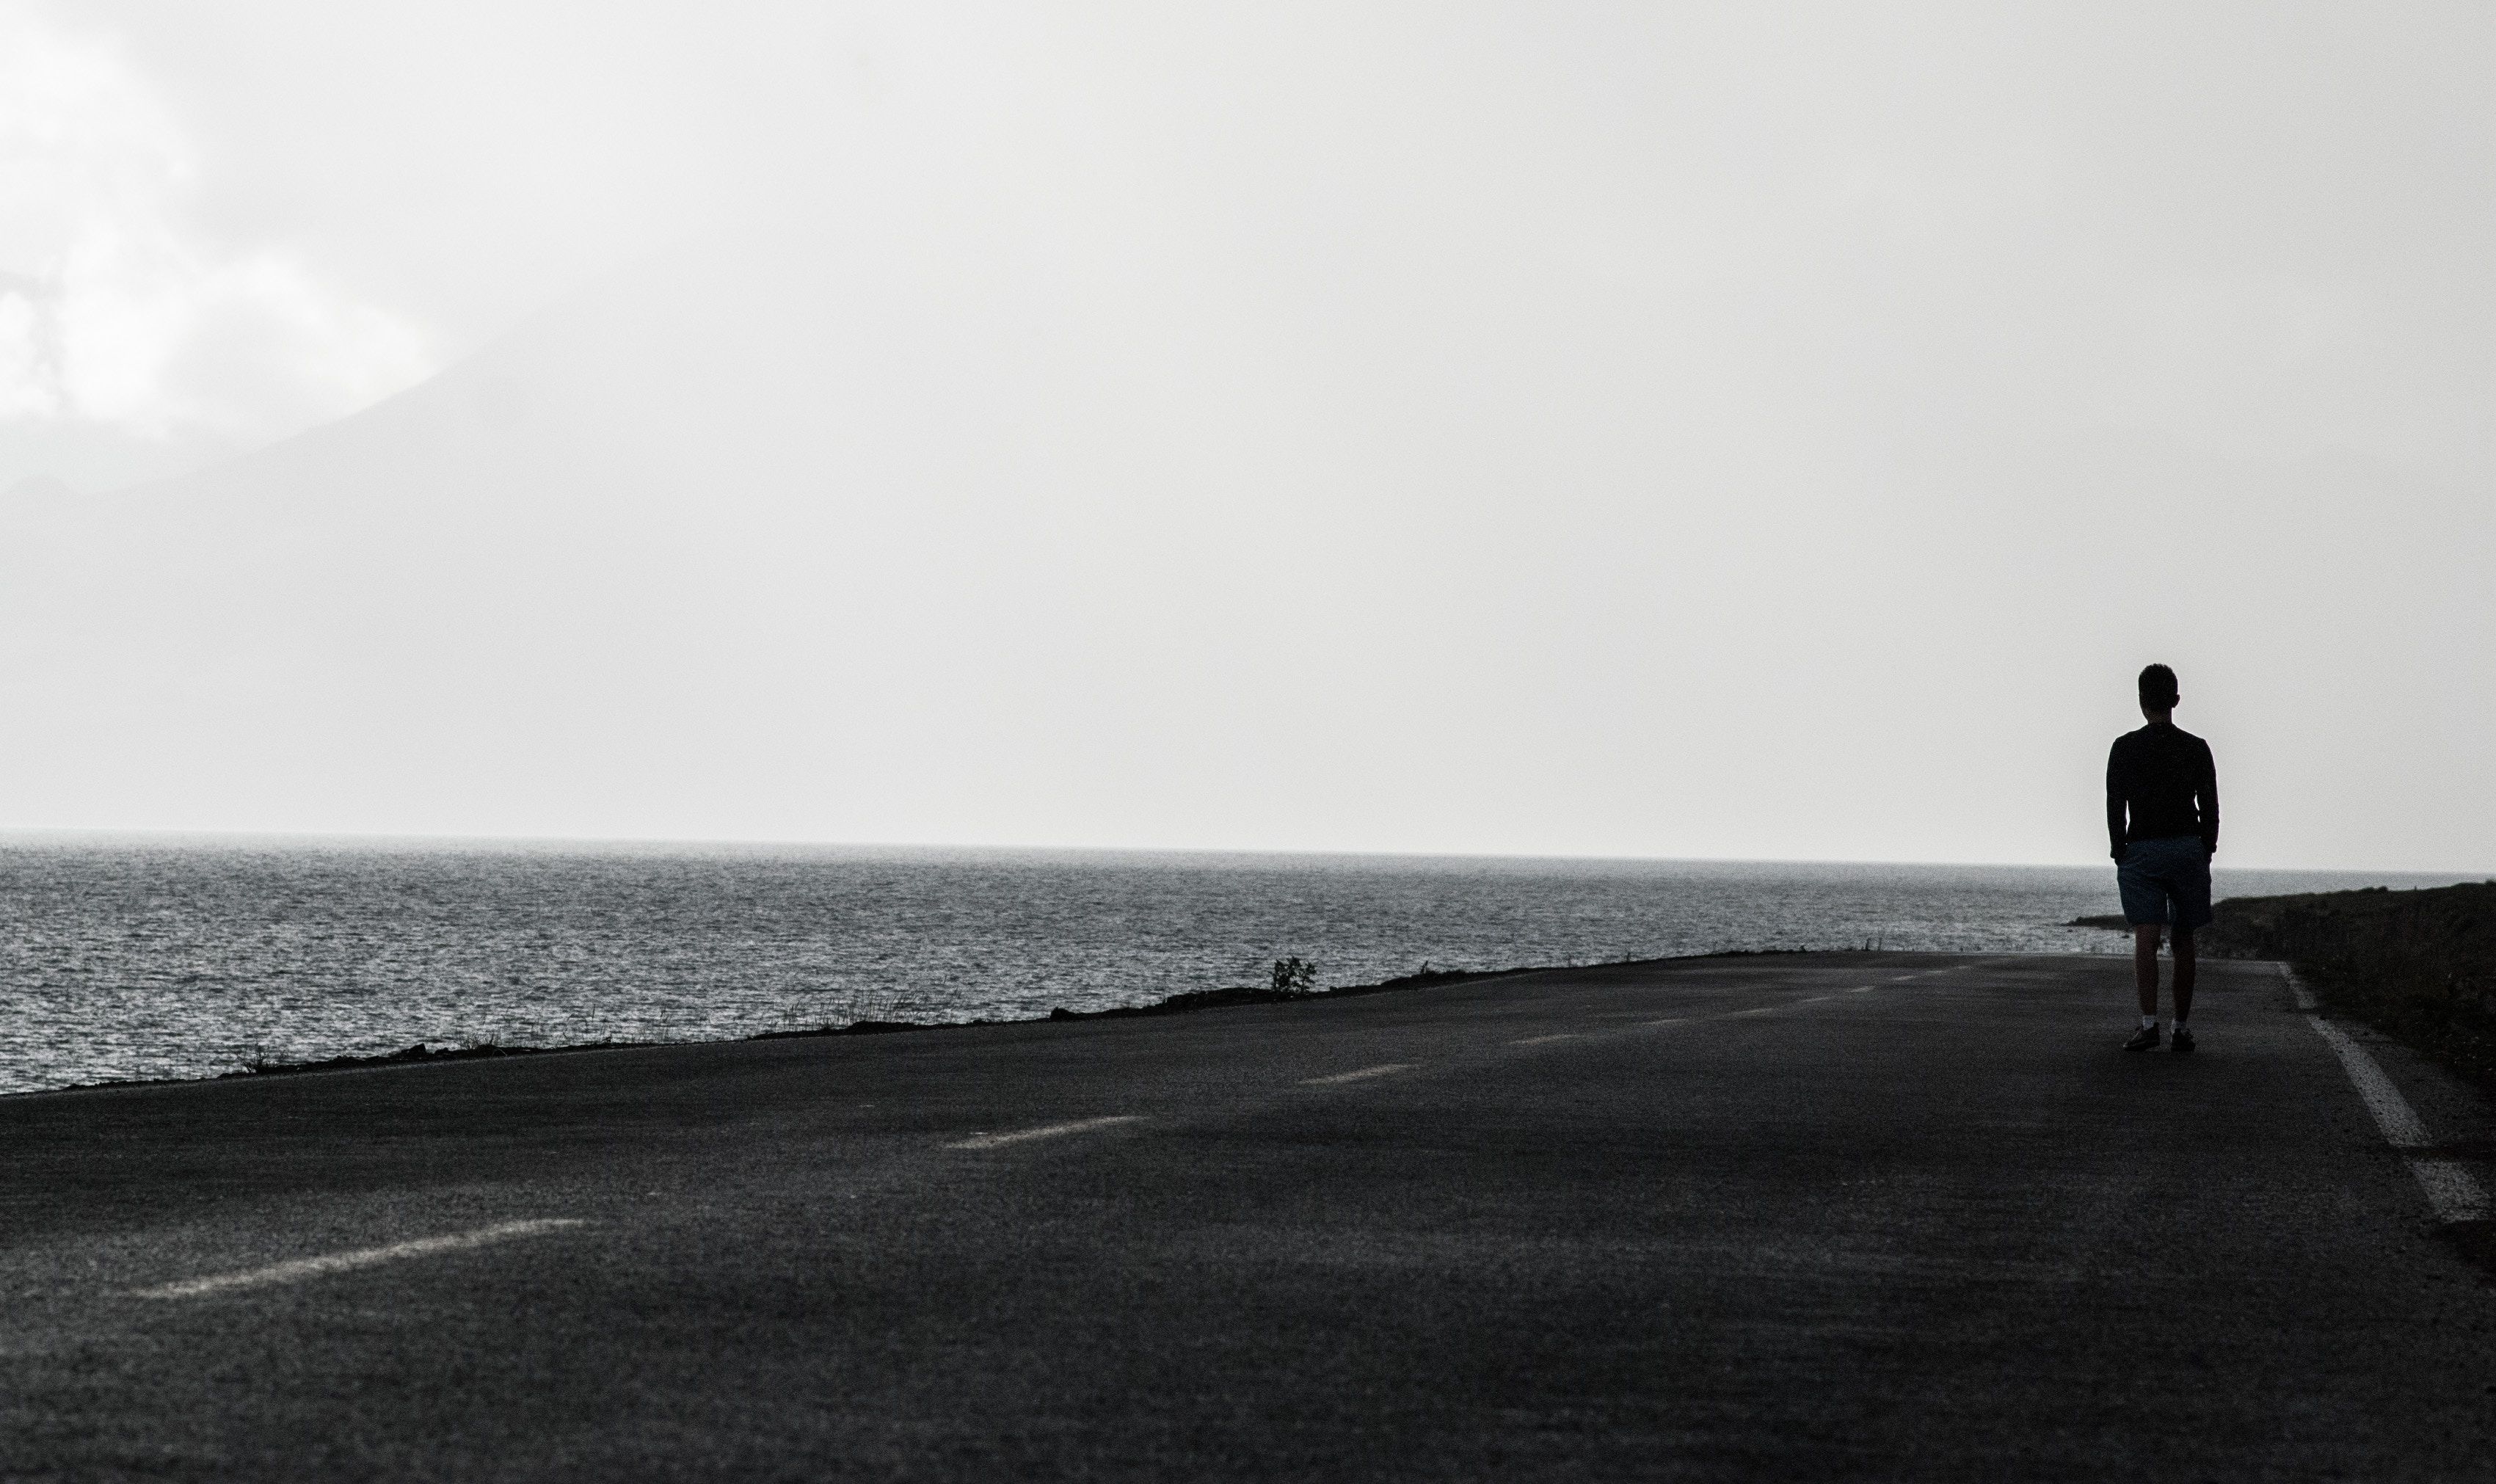 3401x2022 #con, #black and white, #sea, #water, #black wallpaper, #walk, #Free picture, #road, #loneliness, #space, #street, # wallpaper, #cloudy, #man, #alone, #think, #human, #contrast, #person, #black background, #ocean HD